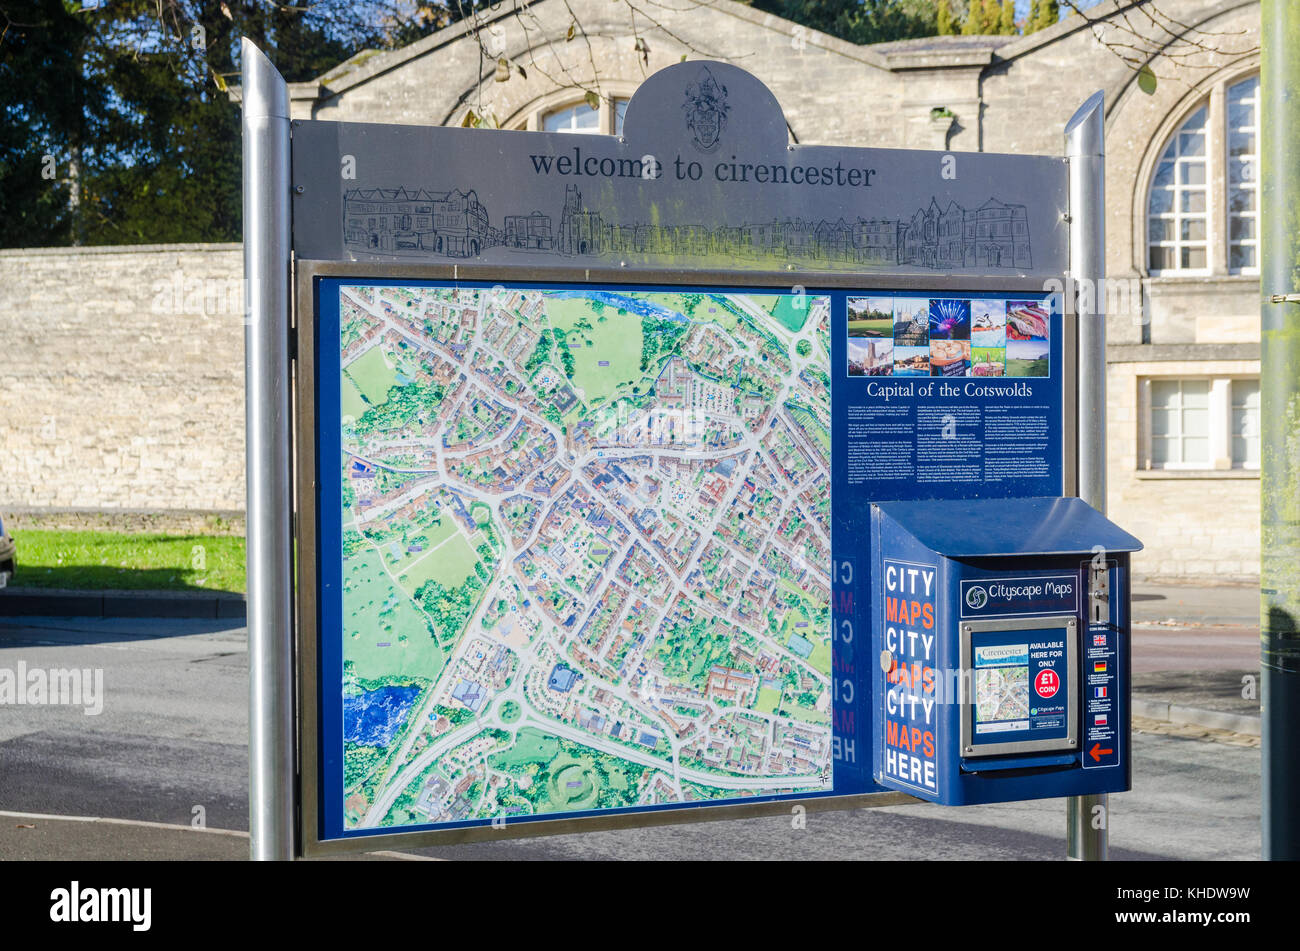 Information board with town map and map vending machine in the Cotswold market town of Cirencester, Goucestershire, UK Stock Photo